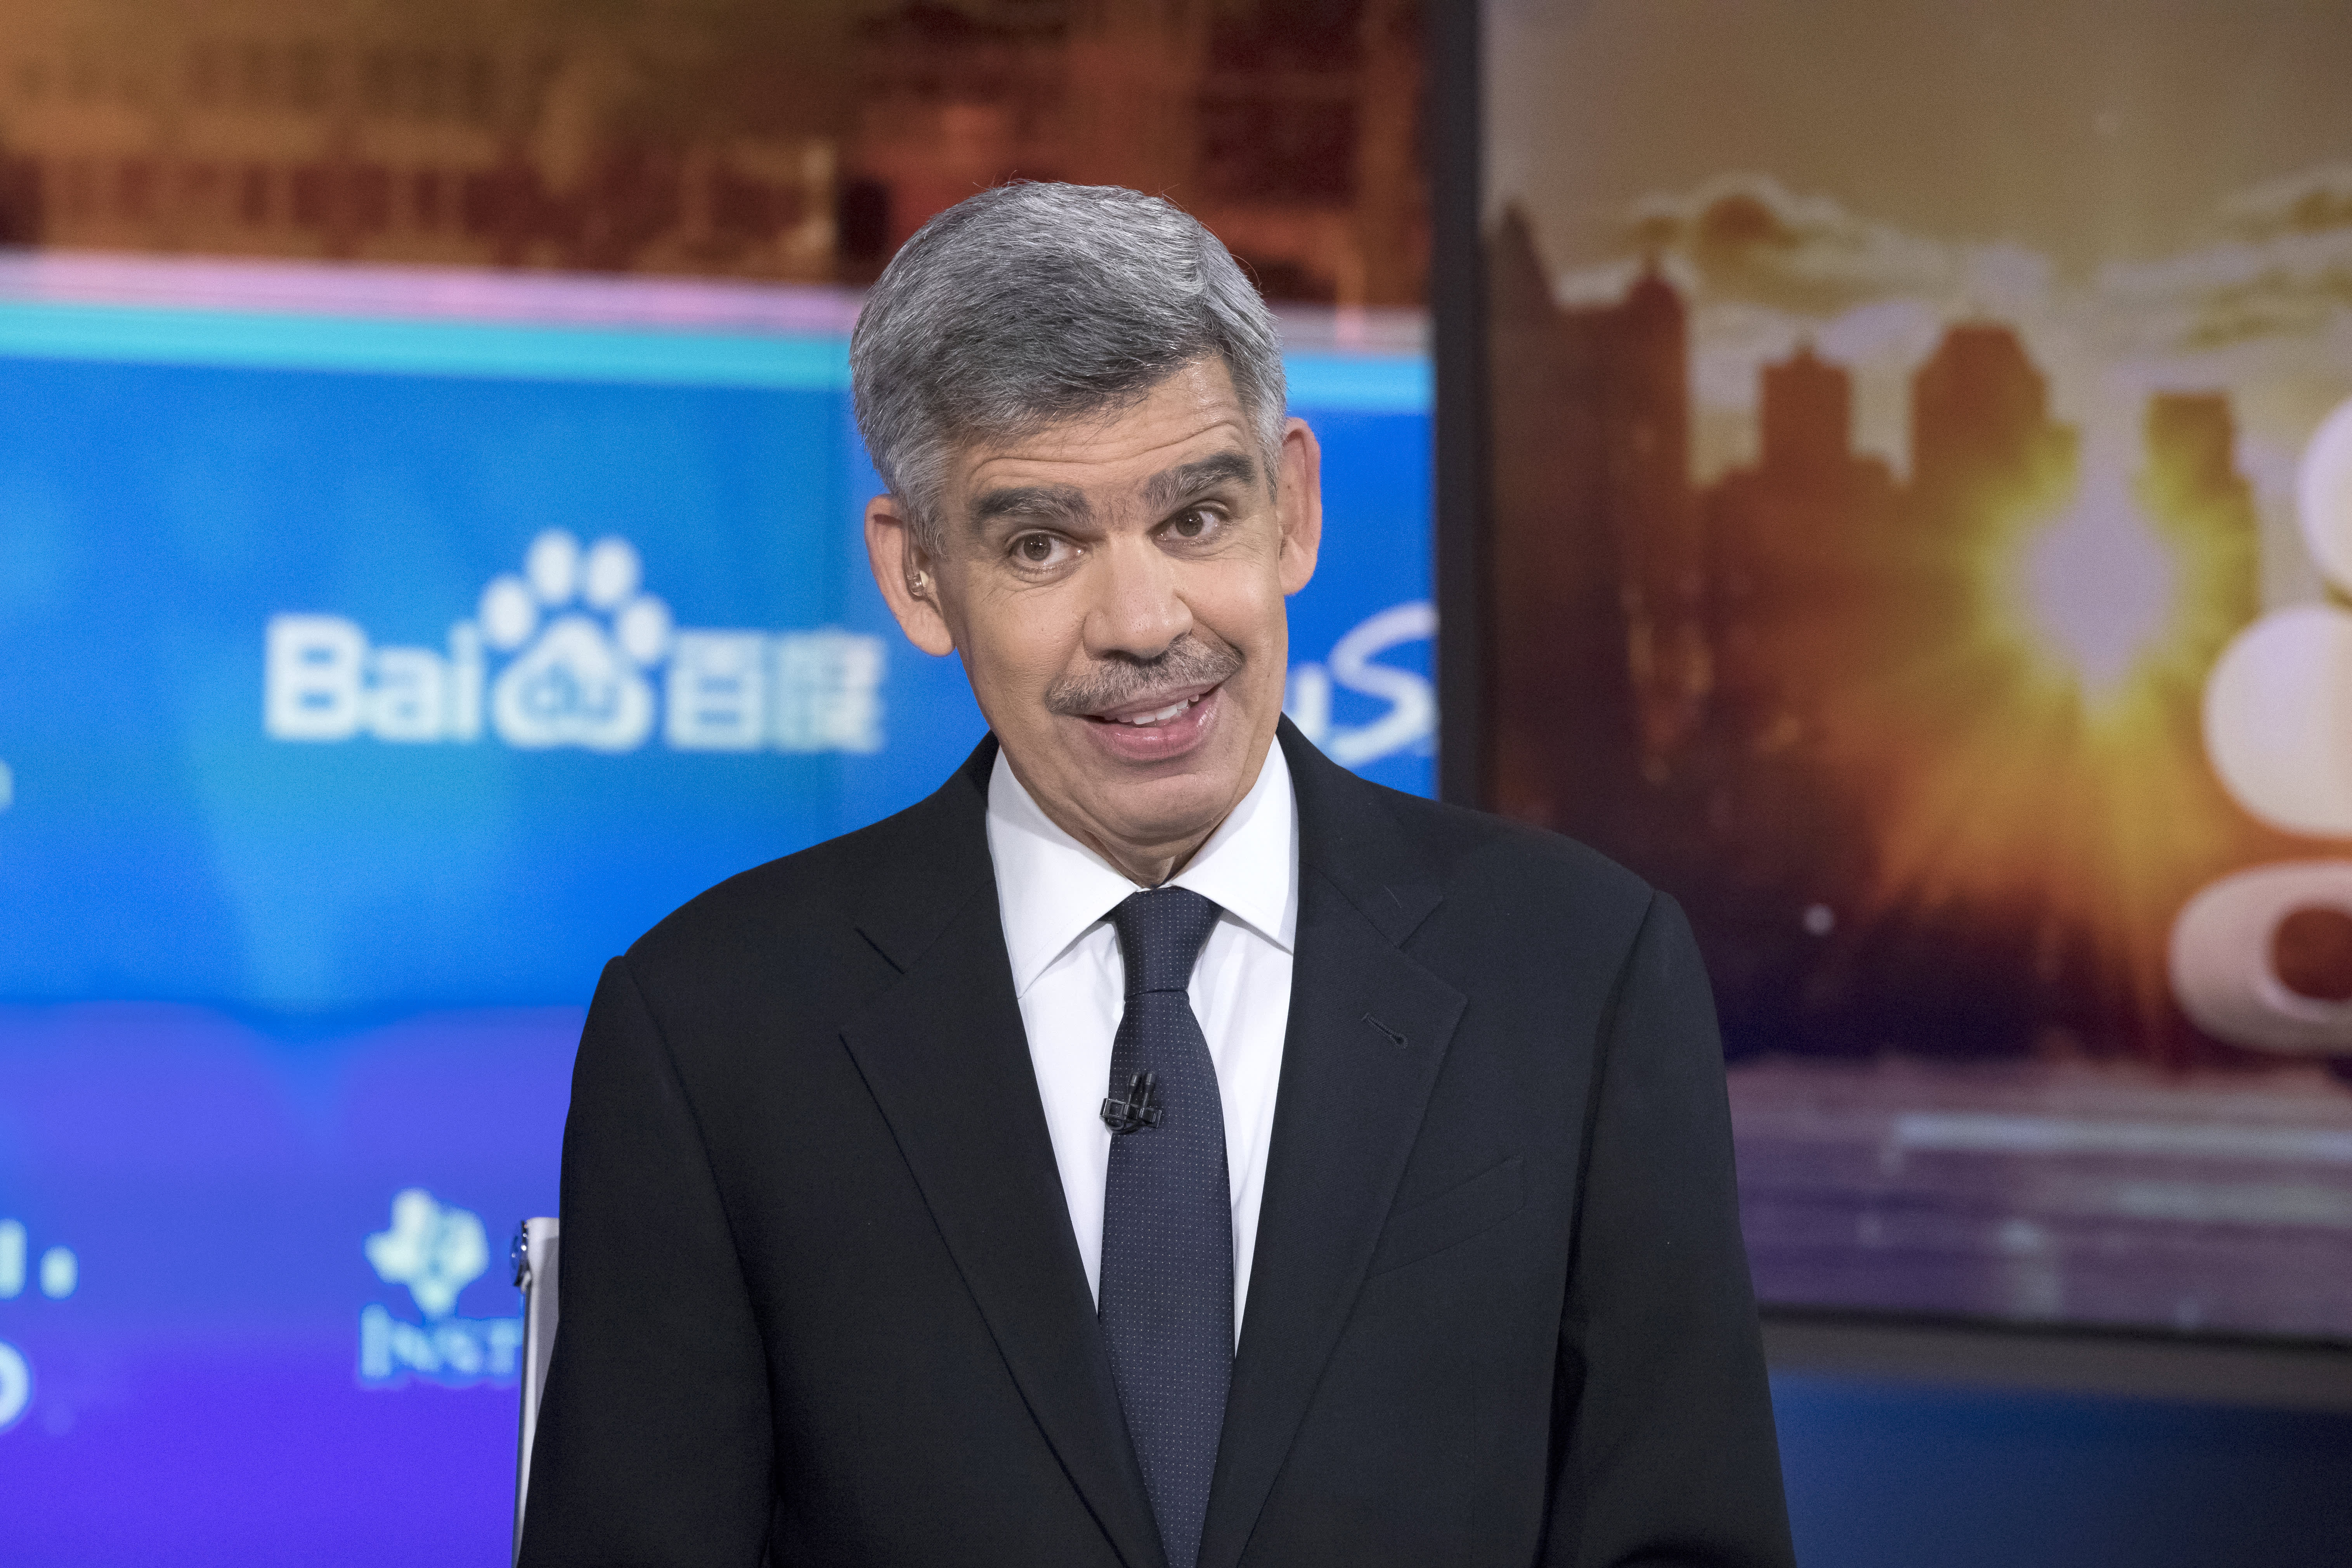 El-Erian says the Fed should go back to raising interest rates more aggressively